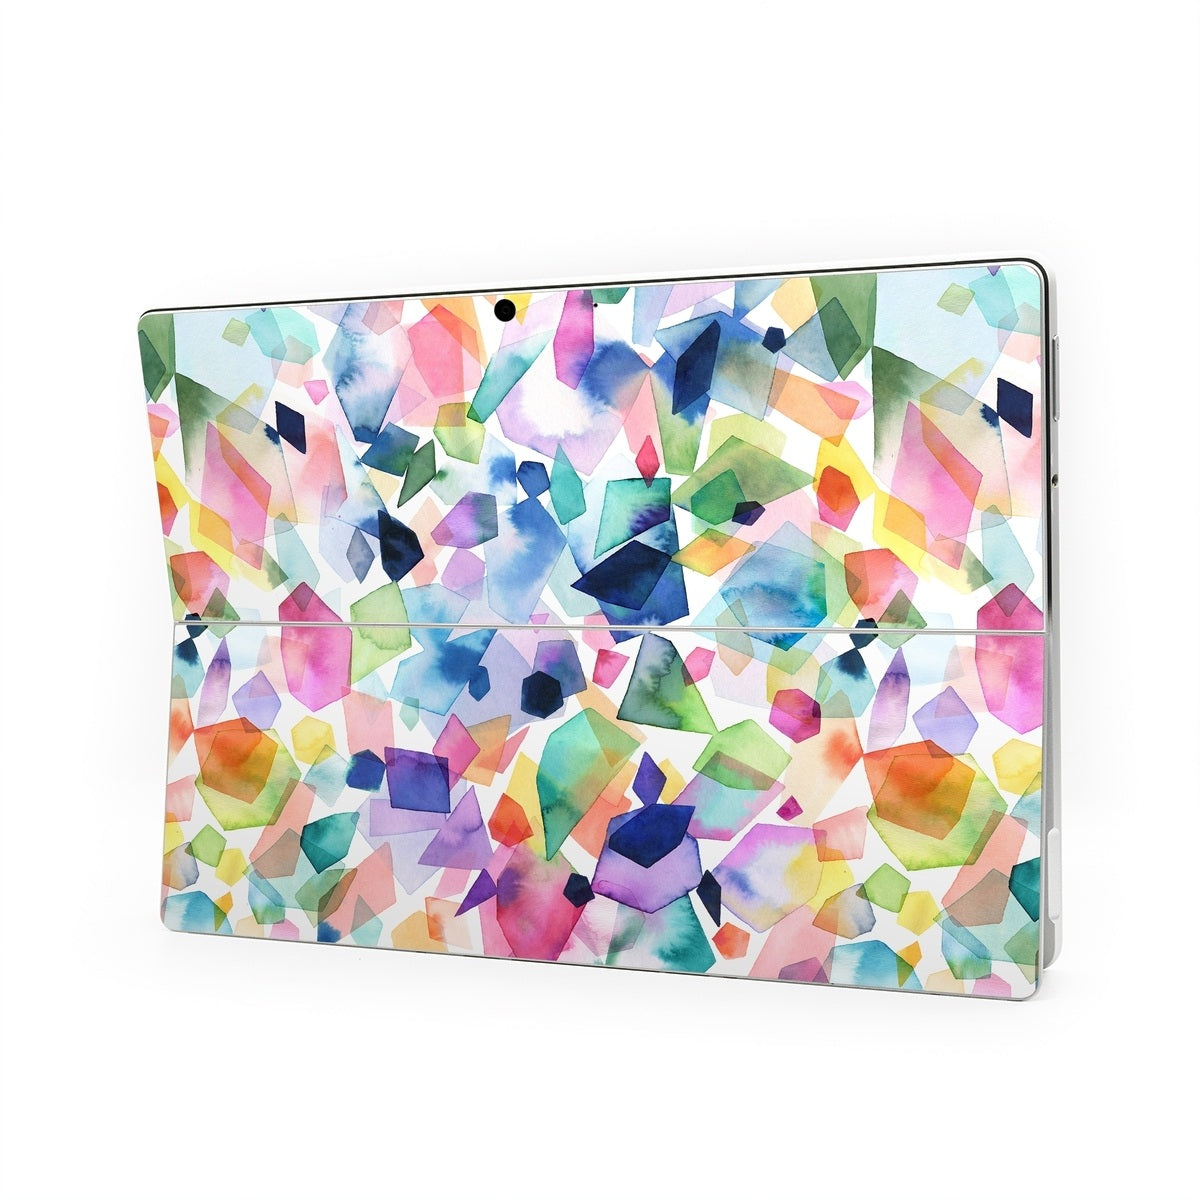 Watercolor Crystals and Gems - Microsoft Surface Pro Skin